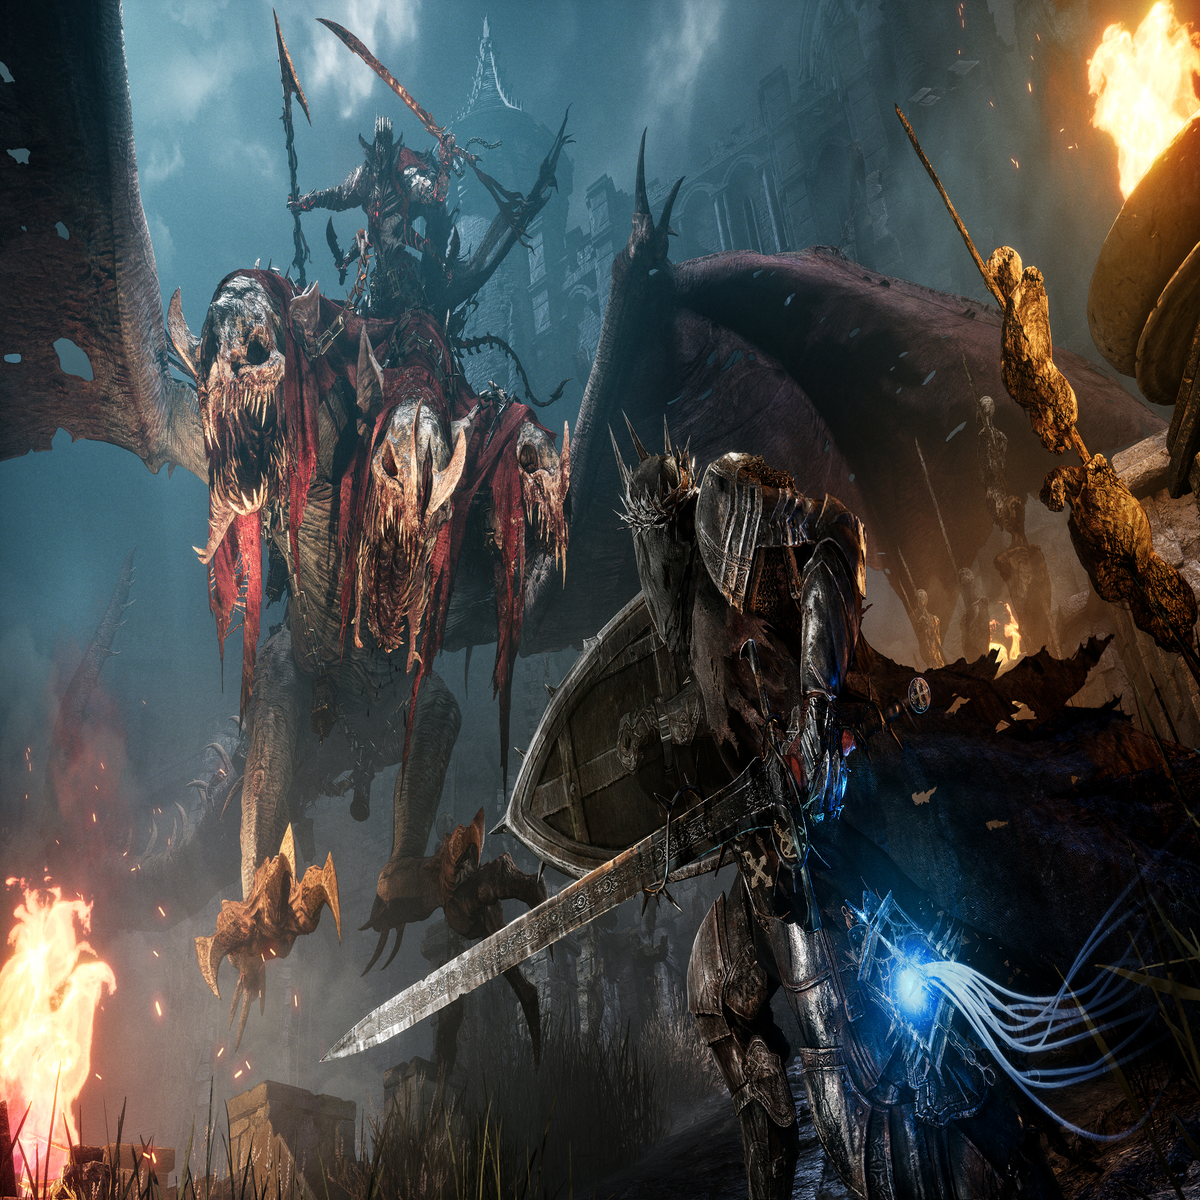 The Lords of the Fallen - Announcement Trailer